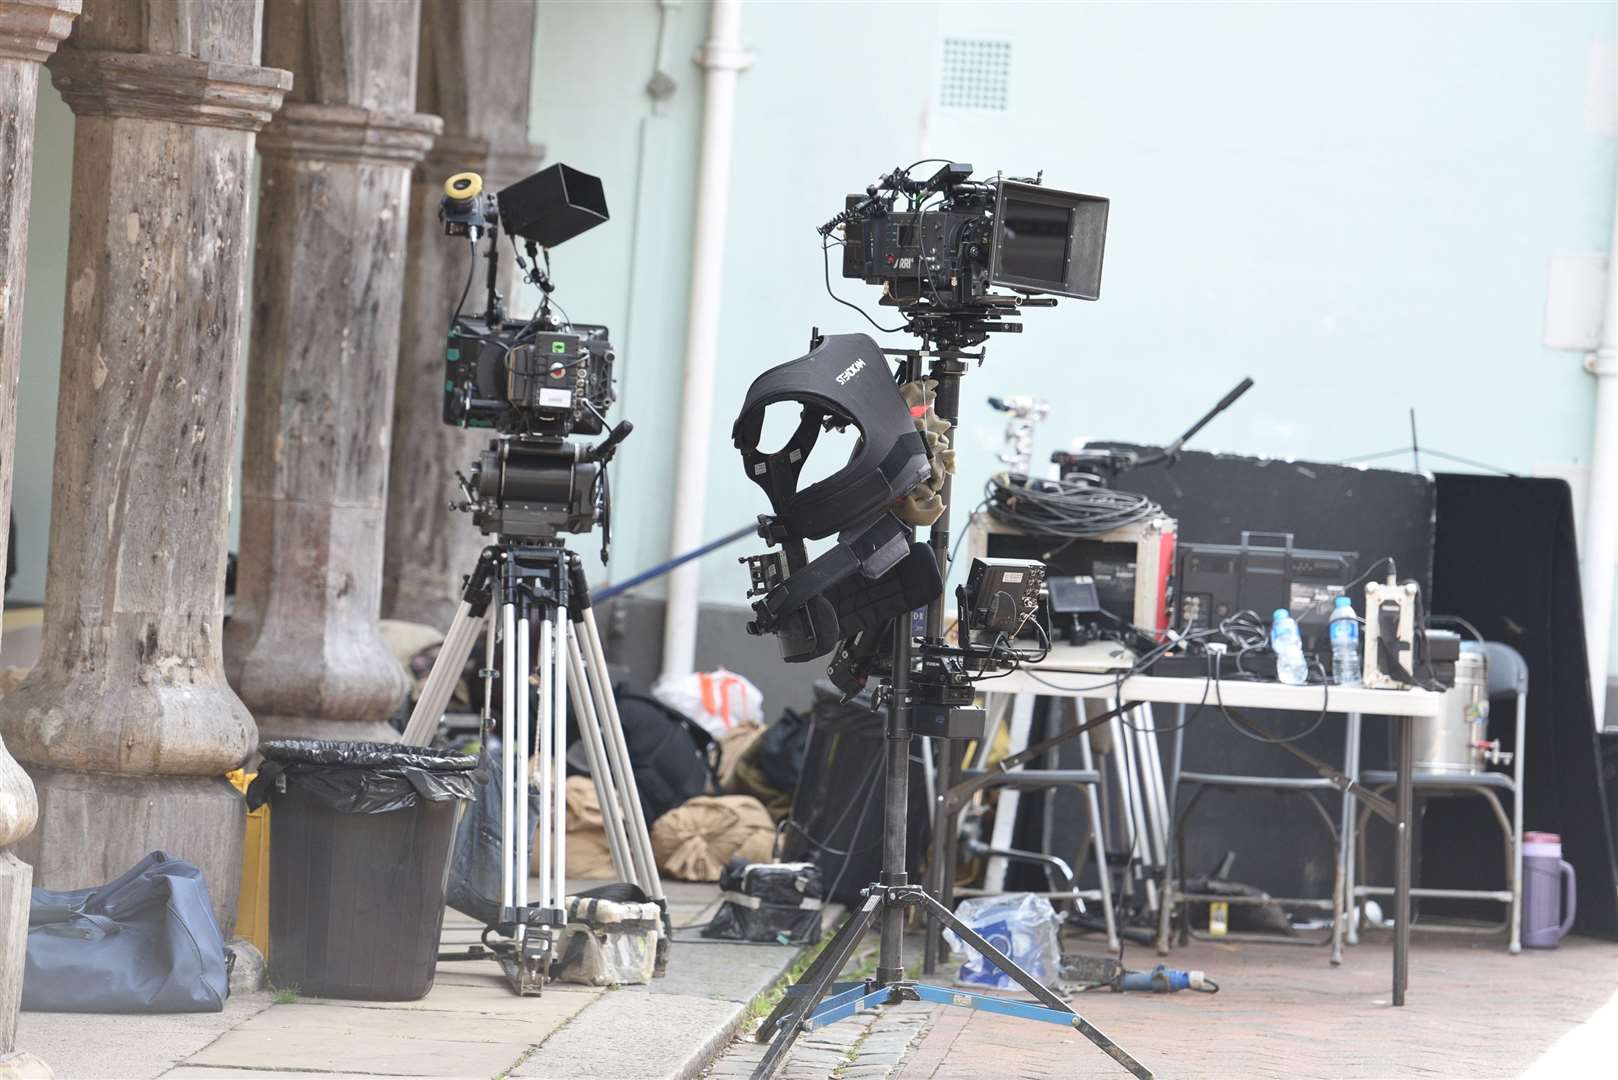 Film crews will use the Guildhall as a back drop again at the weekend to film a new Bollywood comedy